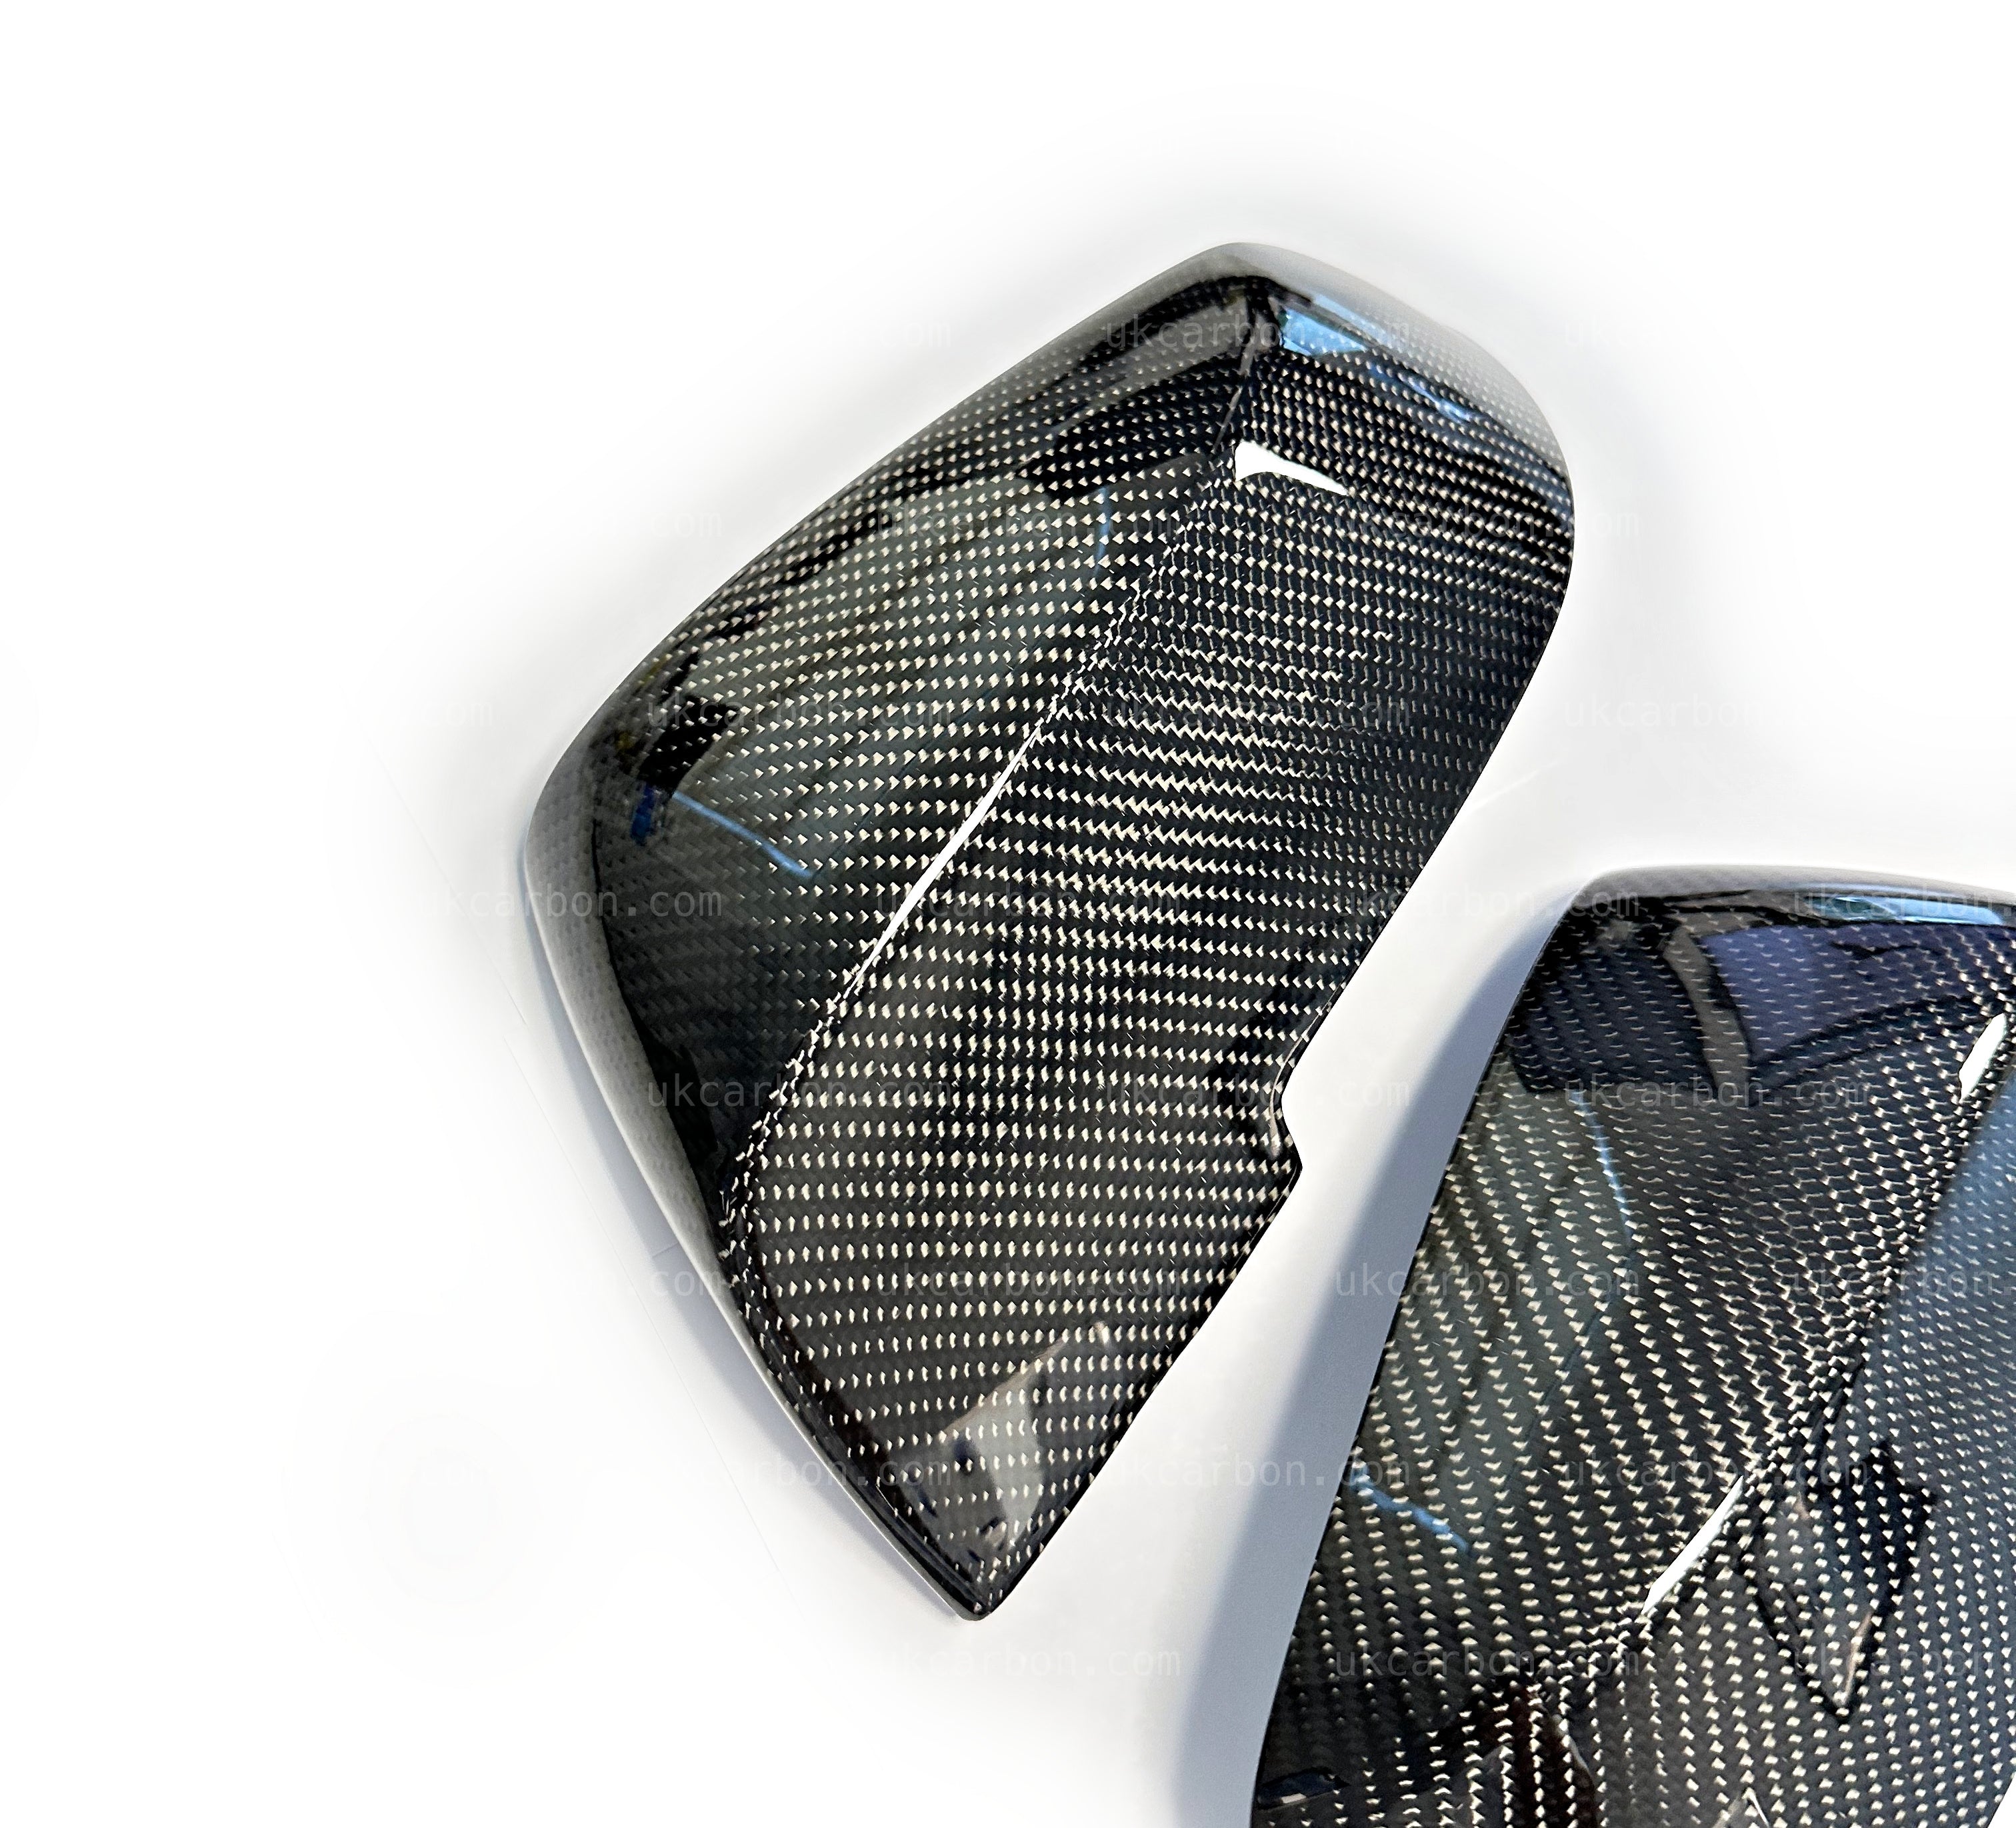 BMW 3 Series Carbon M Performance Wing Mirror Cover Replacements F30 by UKCarbon